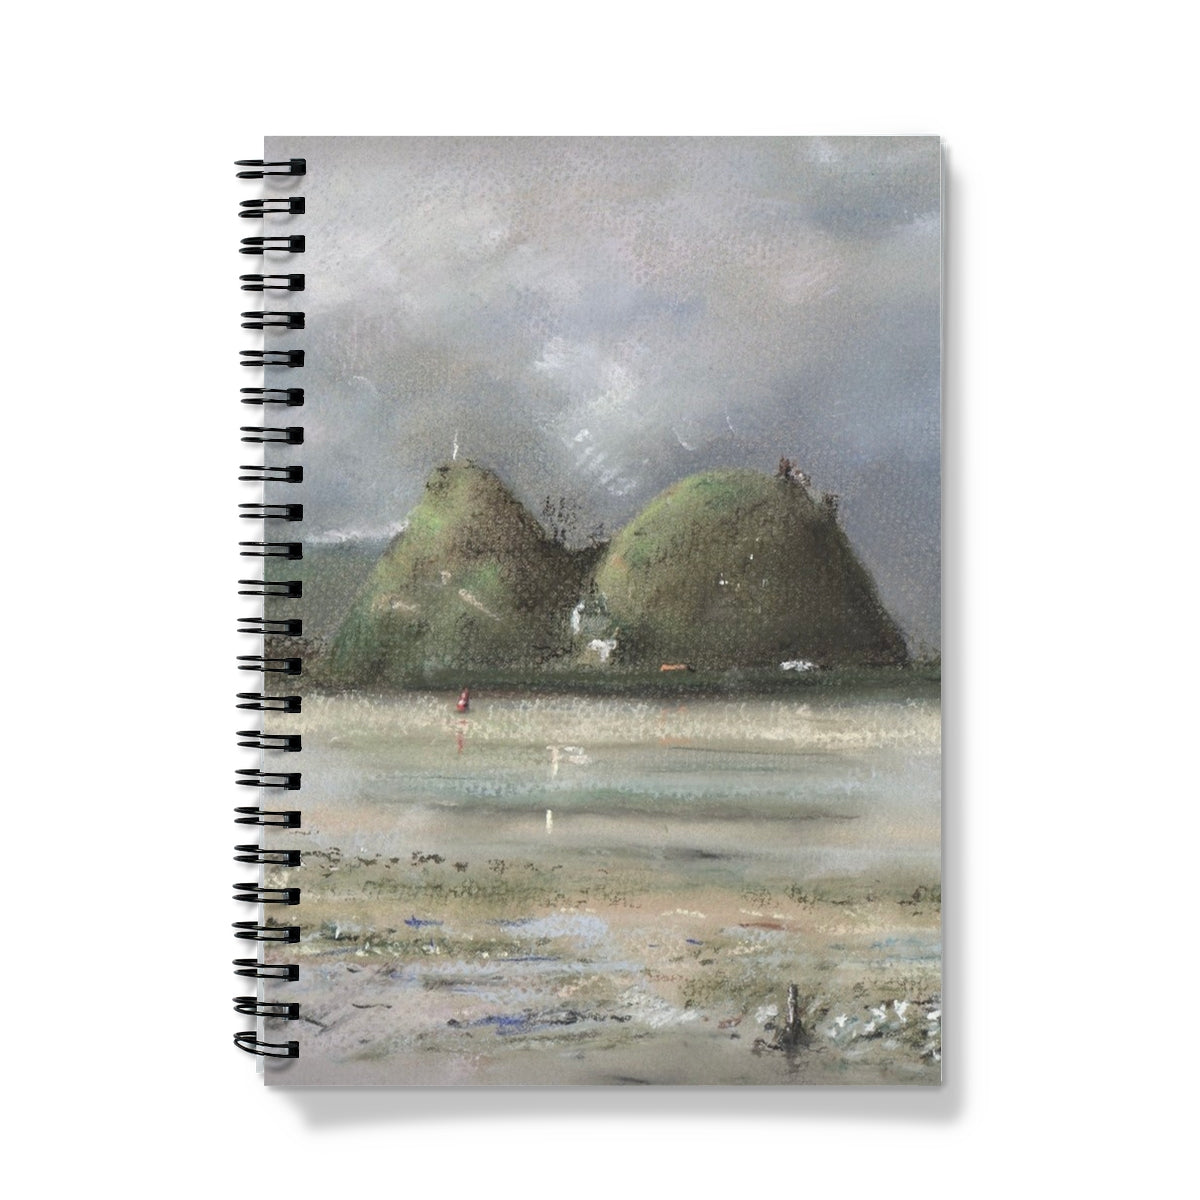 Dumbarton Rock Art Gifts Notebook-Journals & Notebooks-River Clyde Art Gallery-A5-Graph-Paintings, Prints, Homeware, Art Gifts From Scotland By Scottish Artist Kevin Hunter